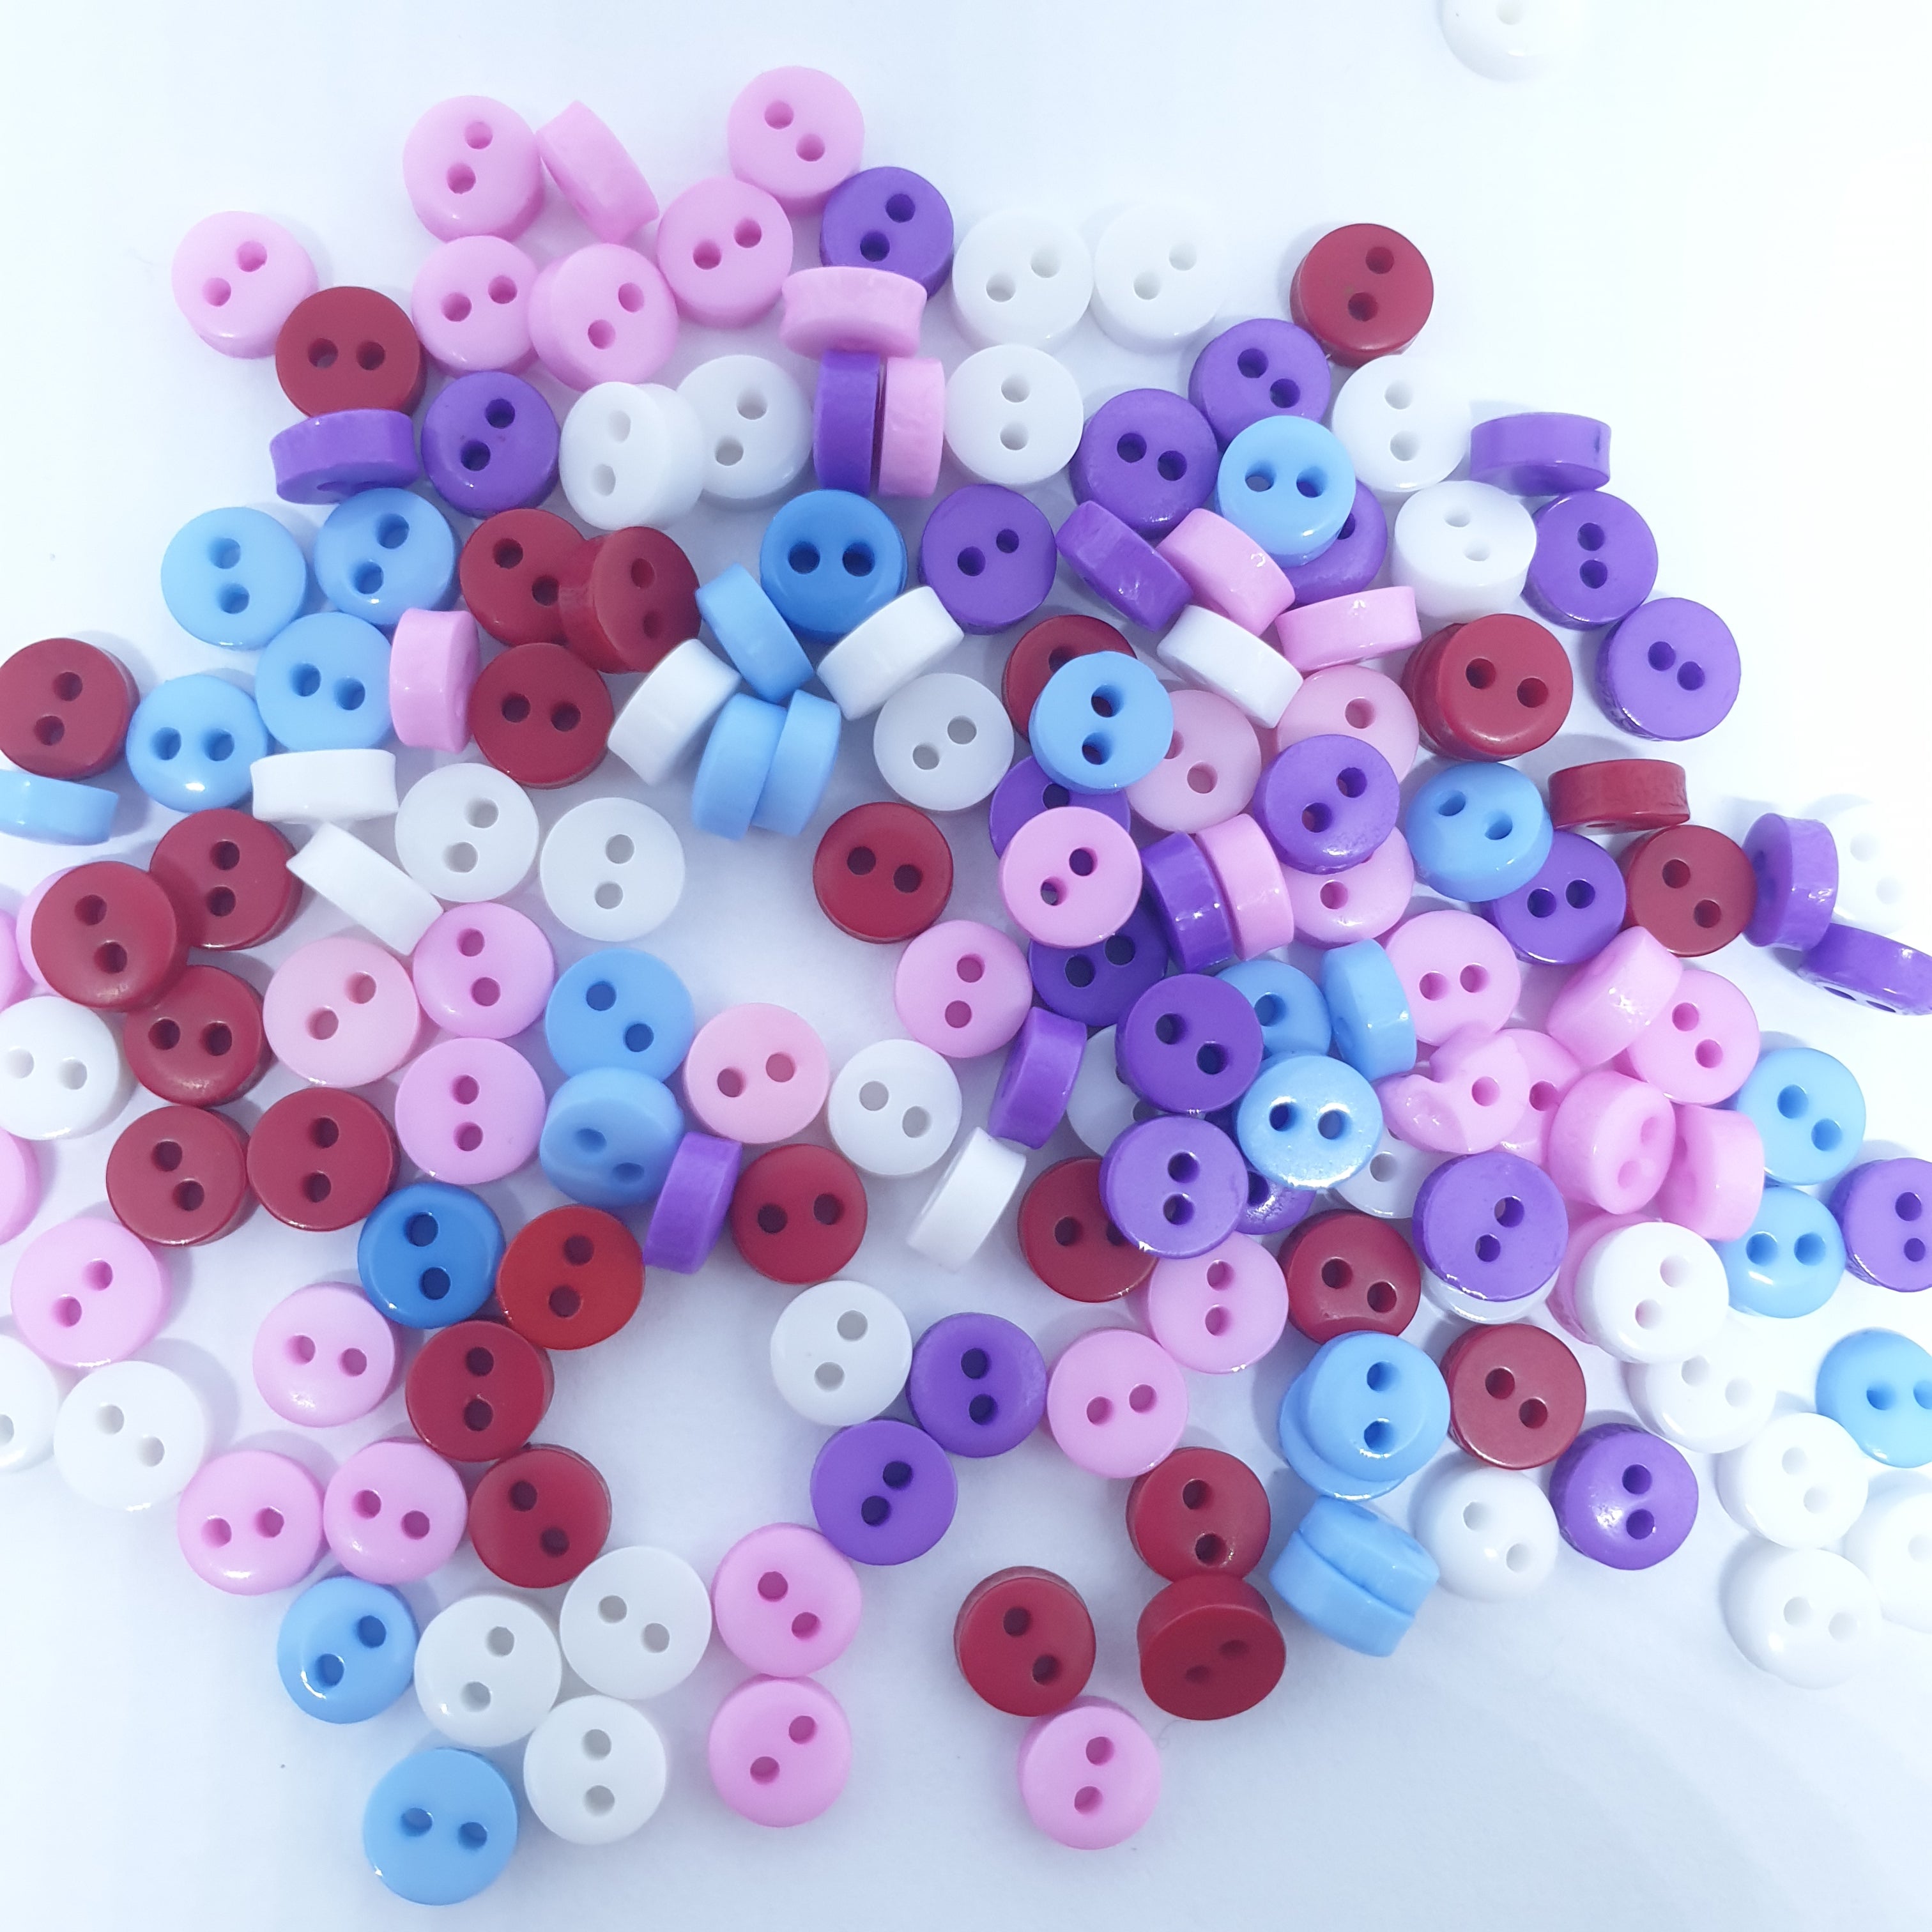 MajorCrafts 240pcs 6mm White Blue Pink Red Purple Mixed 2 Holes Small Round Resin Sewing Button